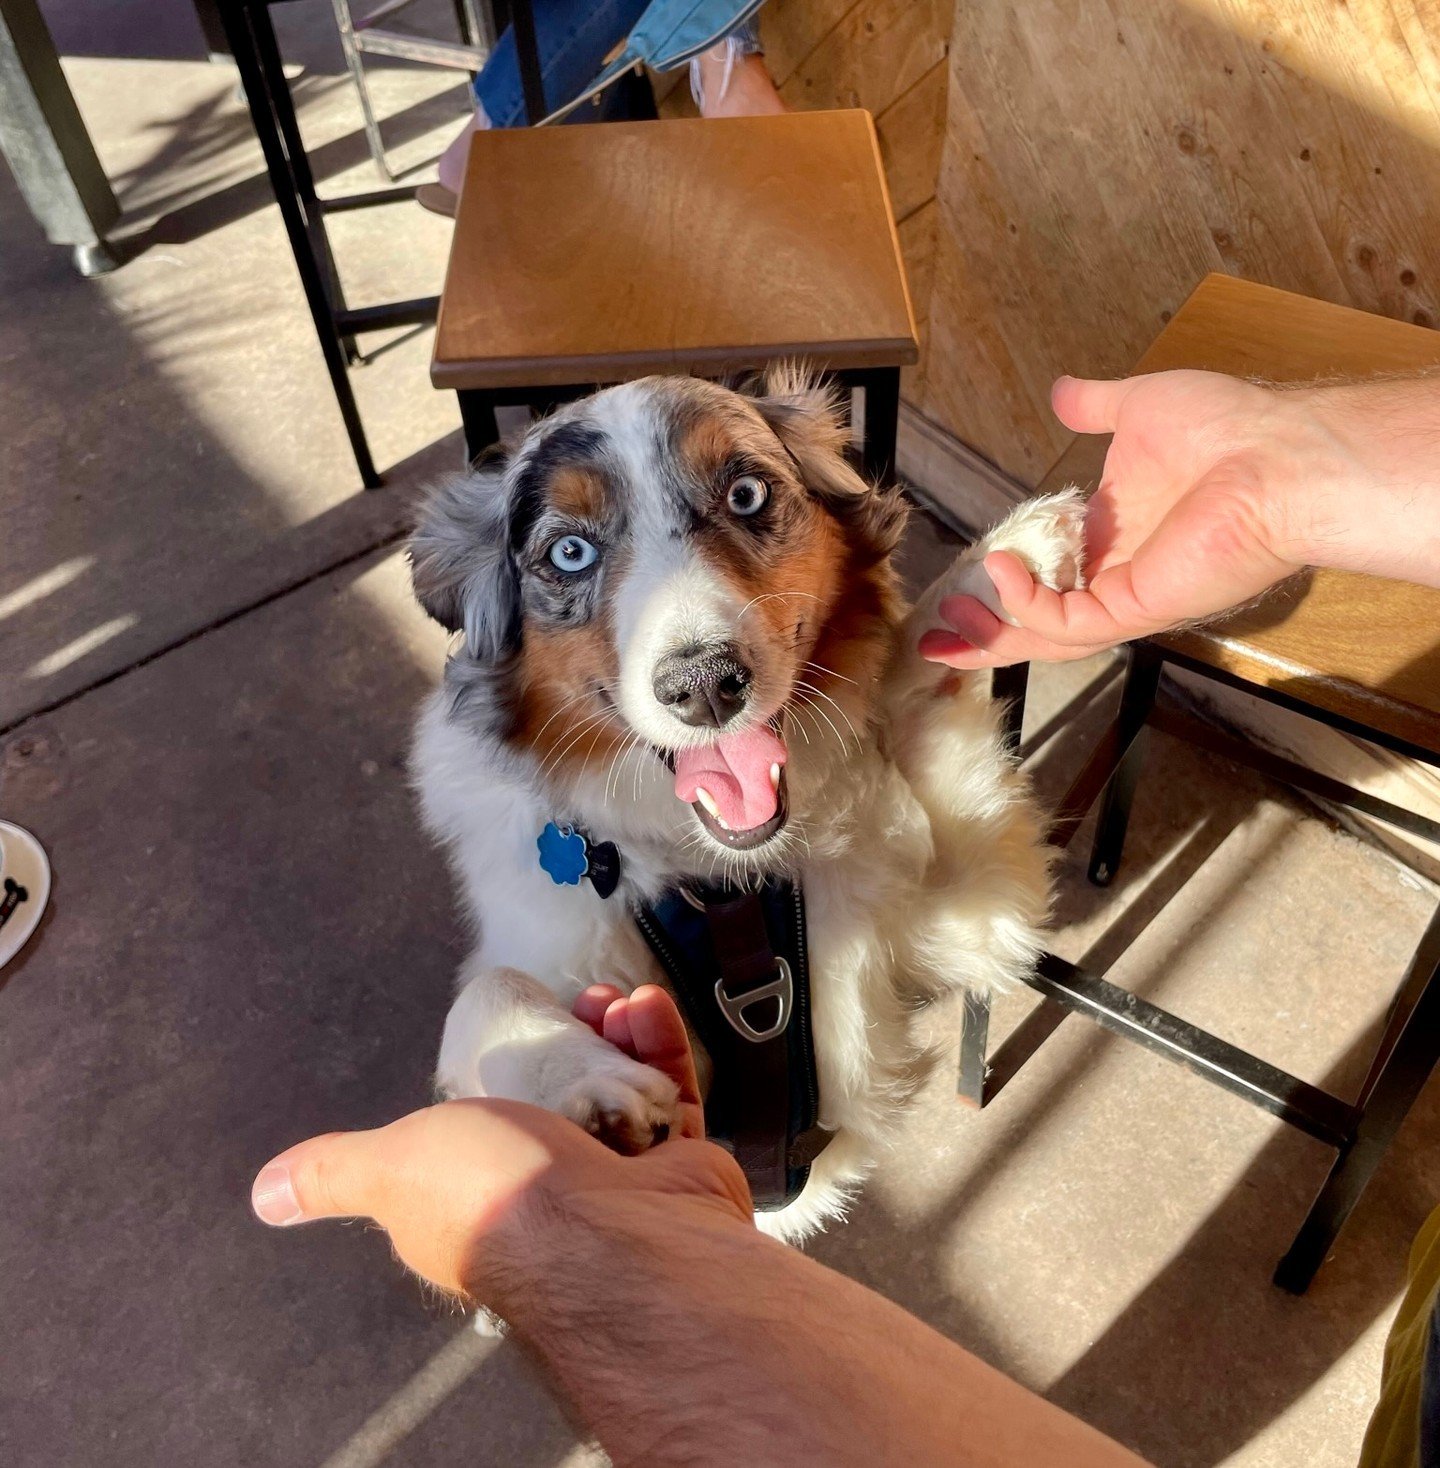 All smiles here for our outdoor patio FINALLY being open 🌞 🍺 🌴

Stop by and bring your pup, all paws are welcome!

#OutdoorSeating #DogsOfBaltimore #ThePointInTowson #DogFriendly #BaltimoreRestaurant #SummerInBaltimore #Drinkspecials